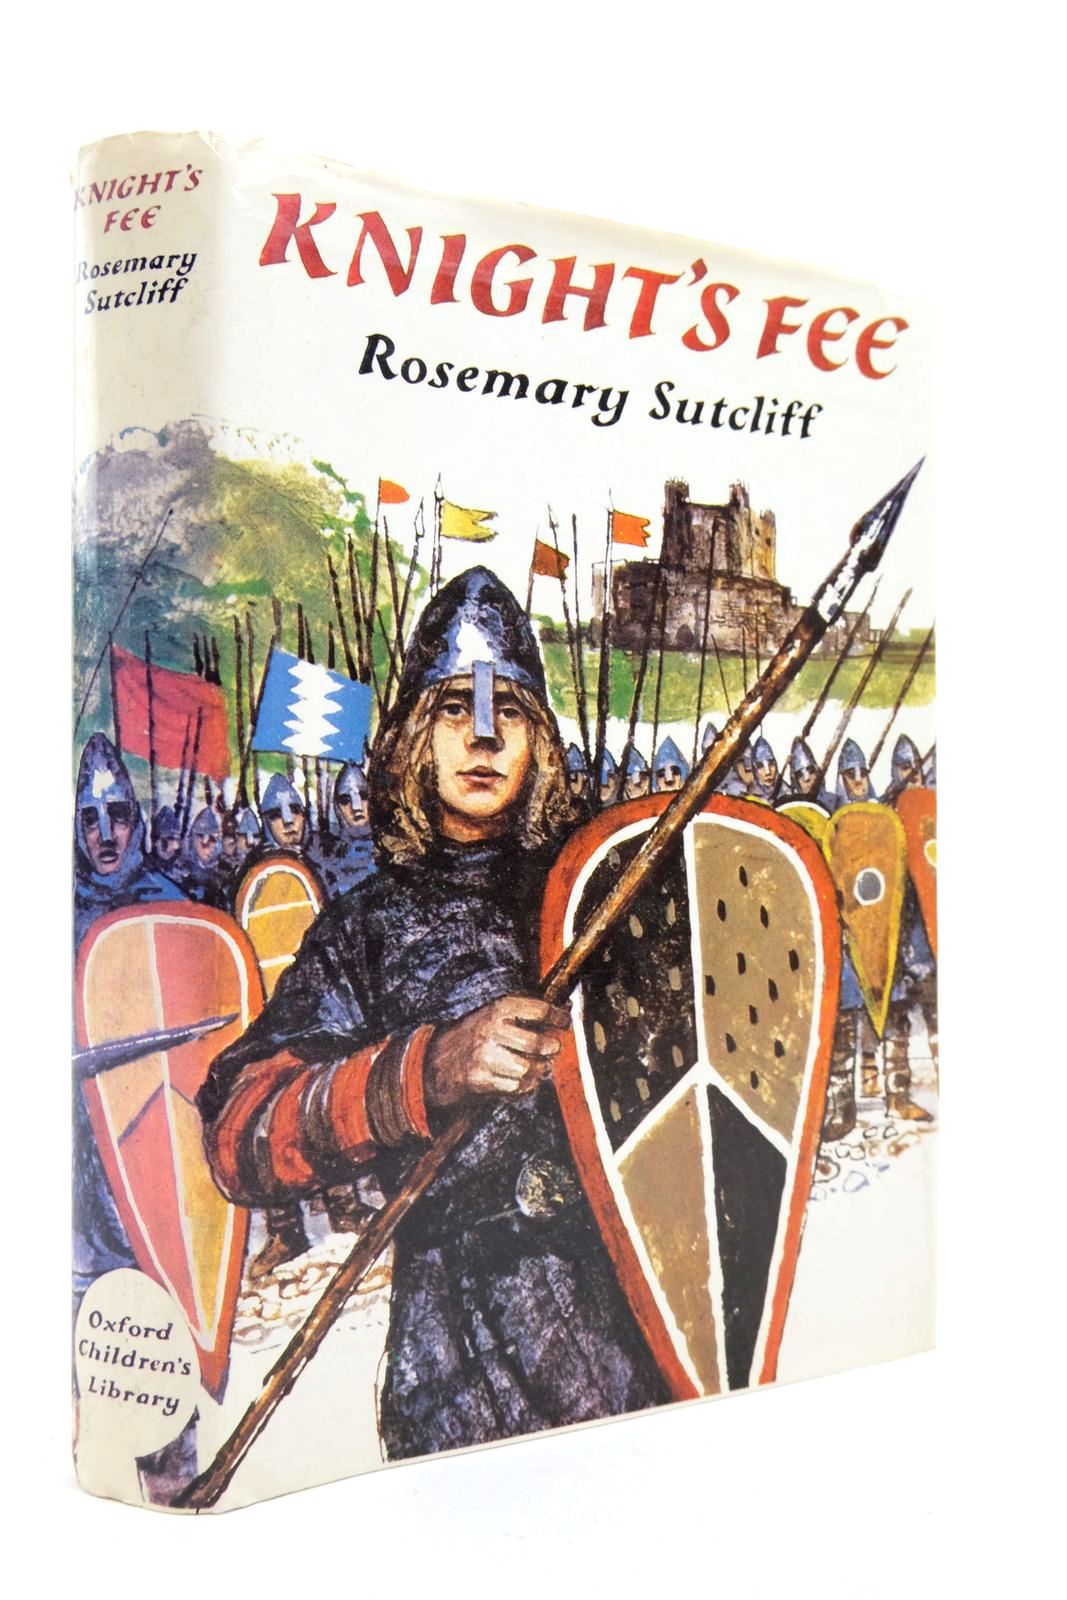 Photo of KNIGHT'S FEE written by Sutcliff, Rosemary illustrated by Keeping, Charles published by Oxford University Press (STOCK CODE: 2140622)  for sale by Stella & Rose's Books